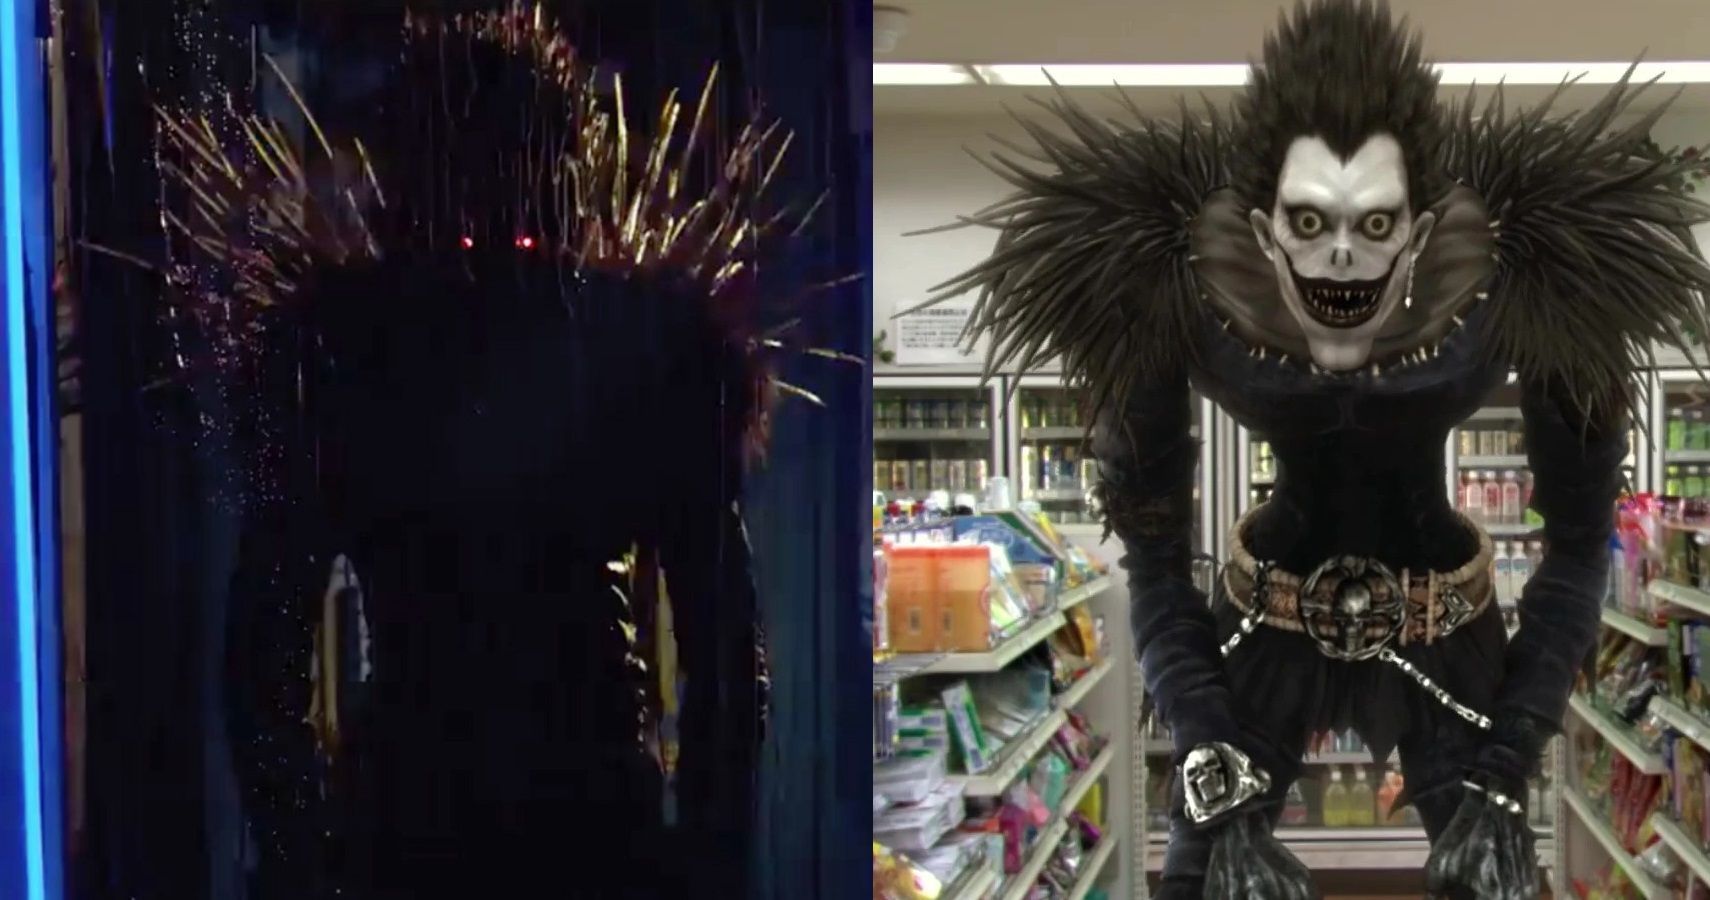 Death Note 10 Major Differences Between The Live Action Movies The Manga